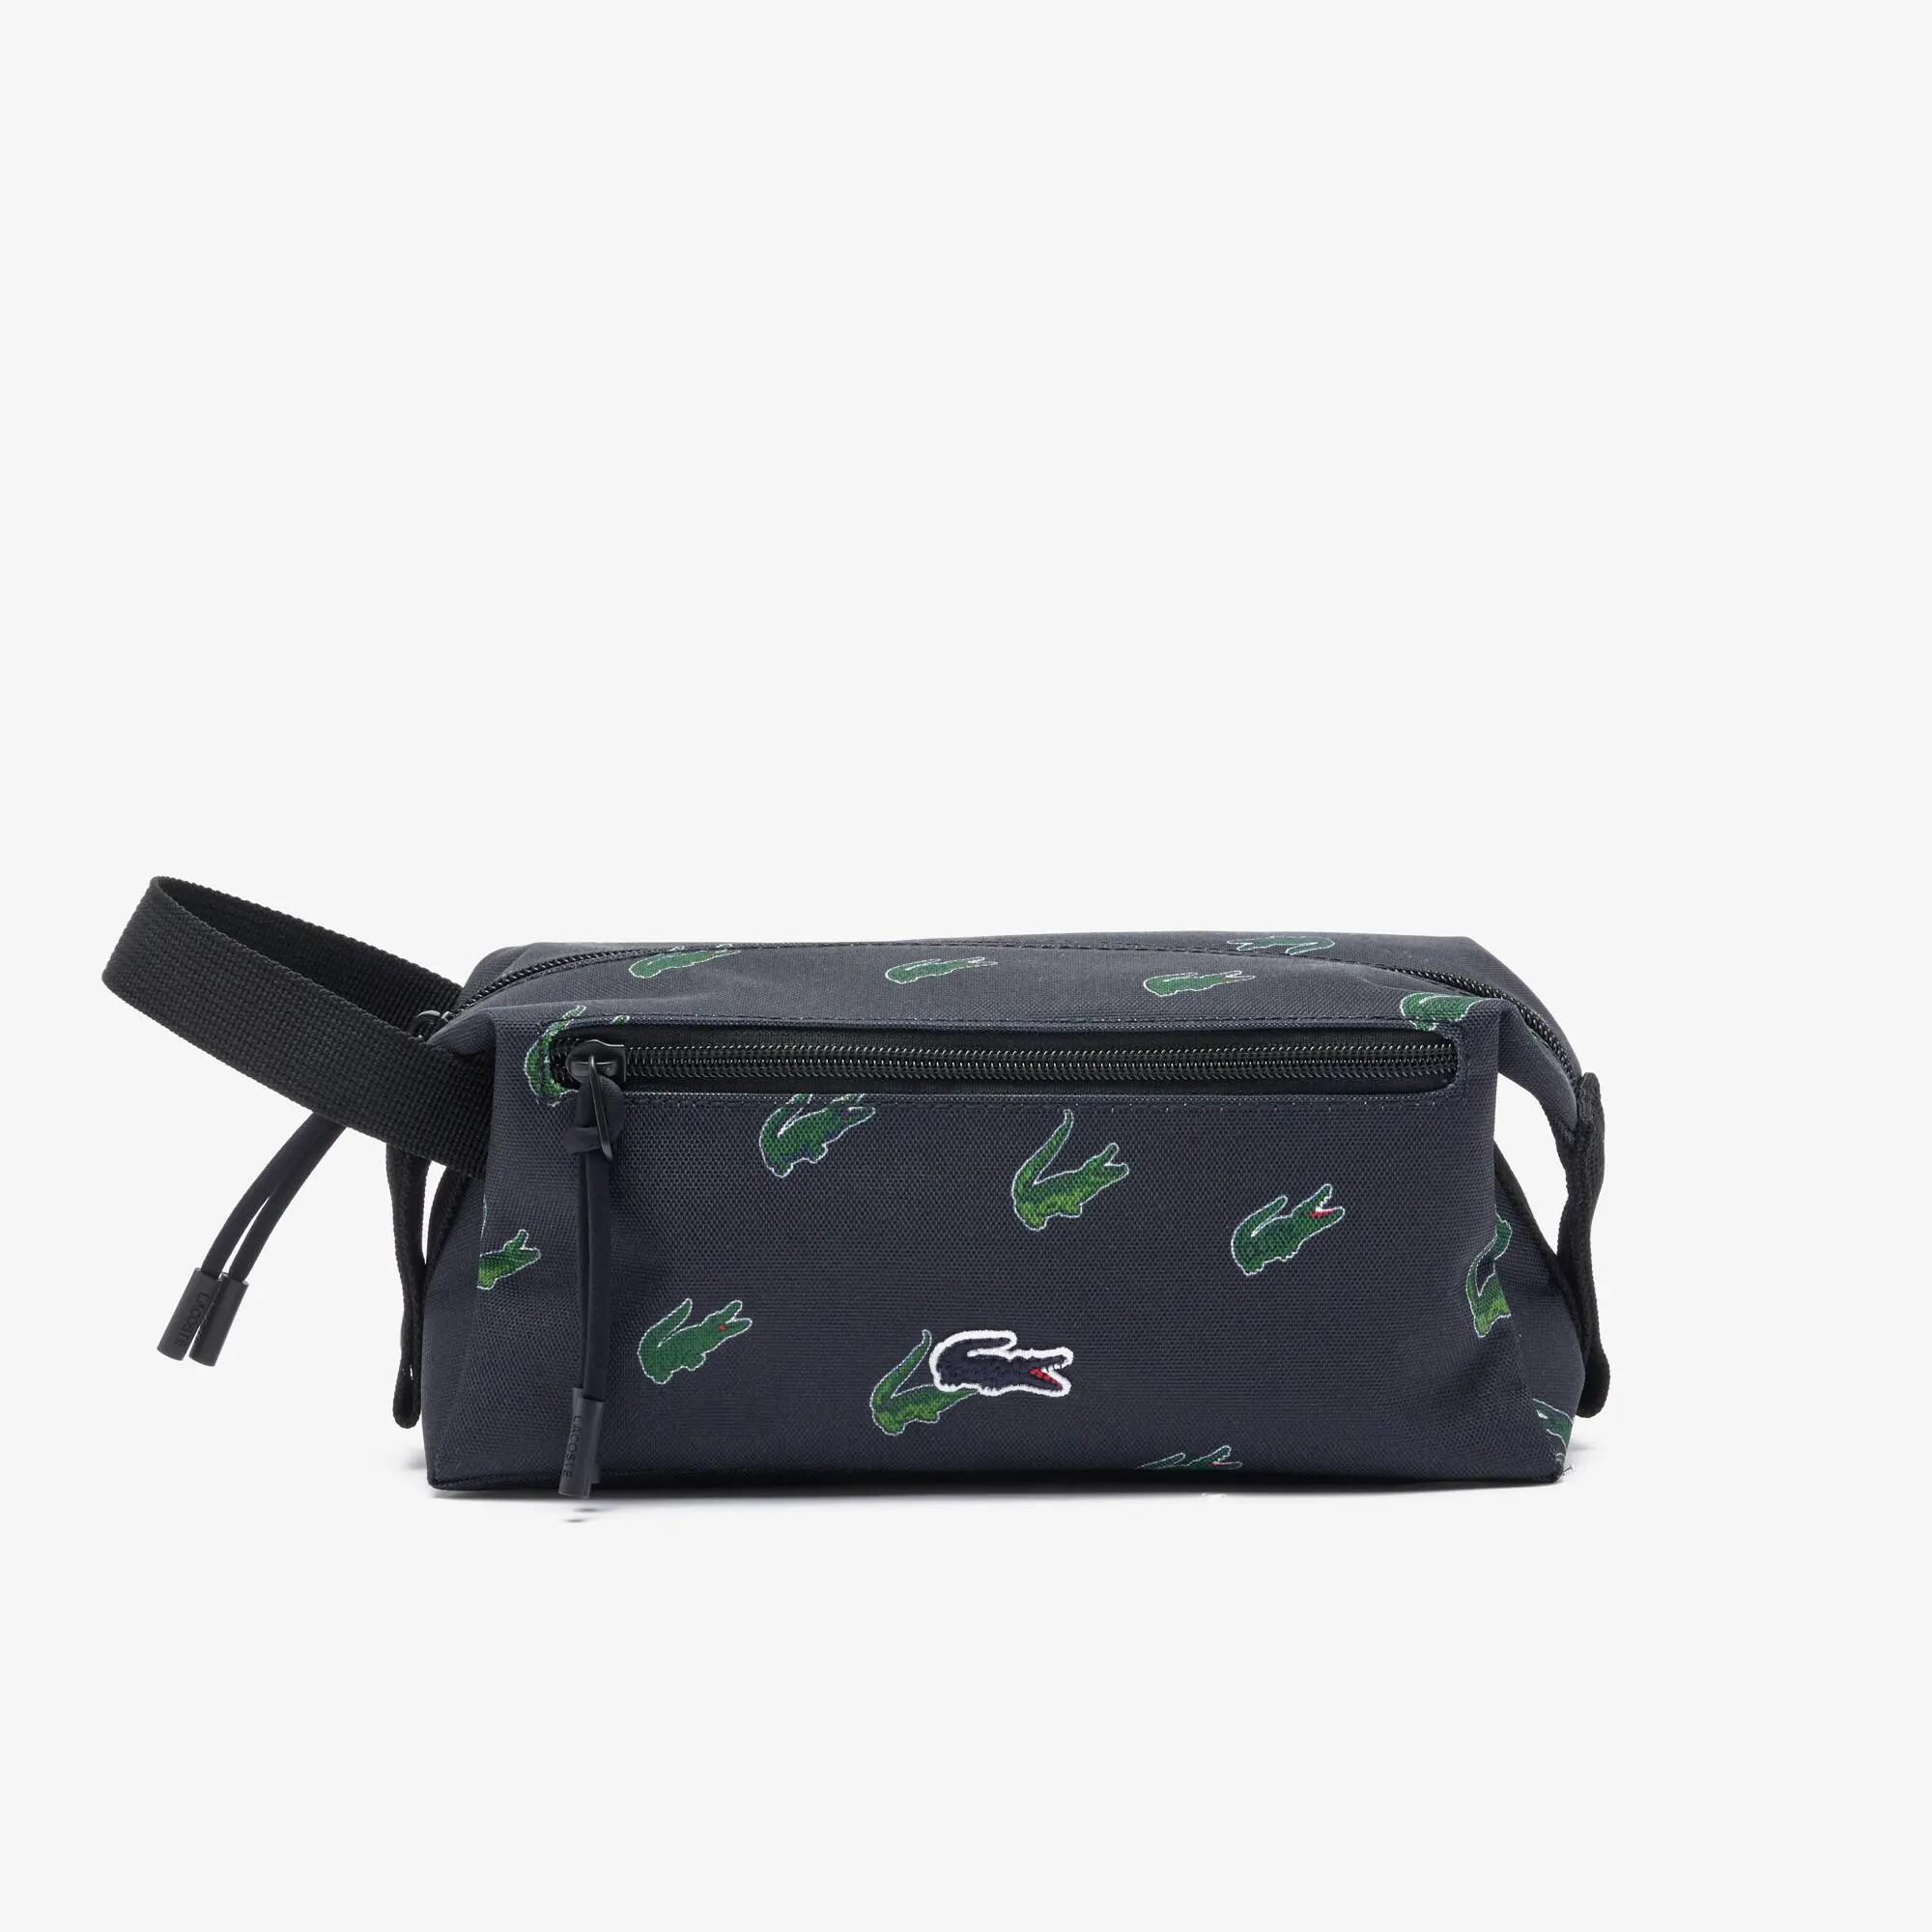 Lacoste Coated Canvas Printed Toiletry Bag. 1